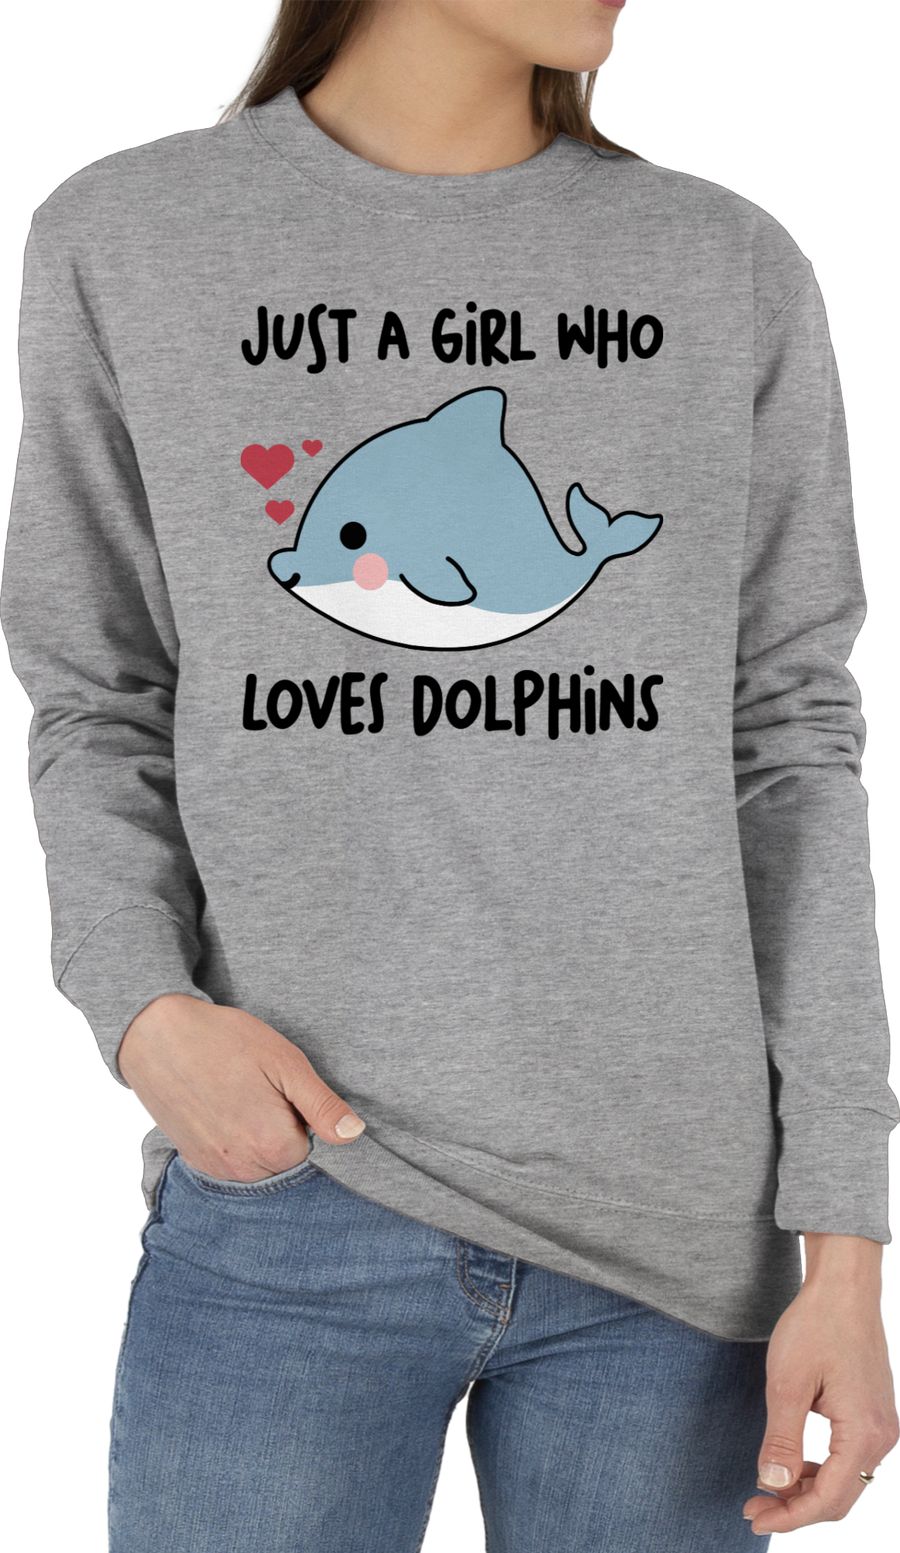 Just a girl who loves dolphins